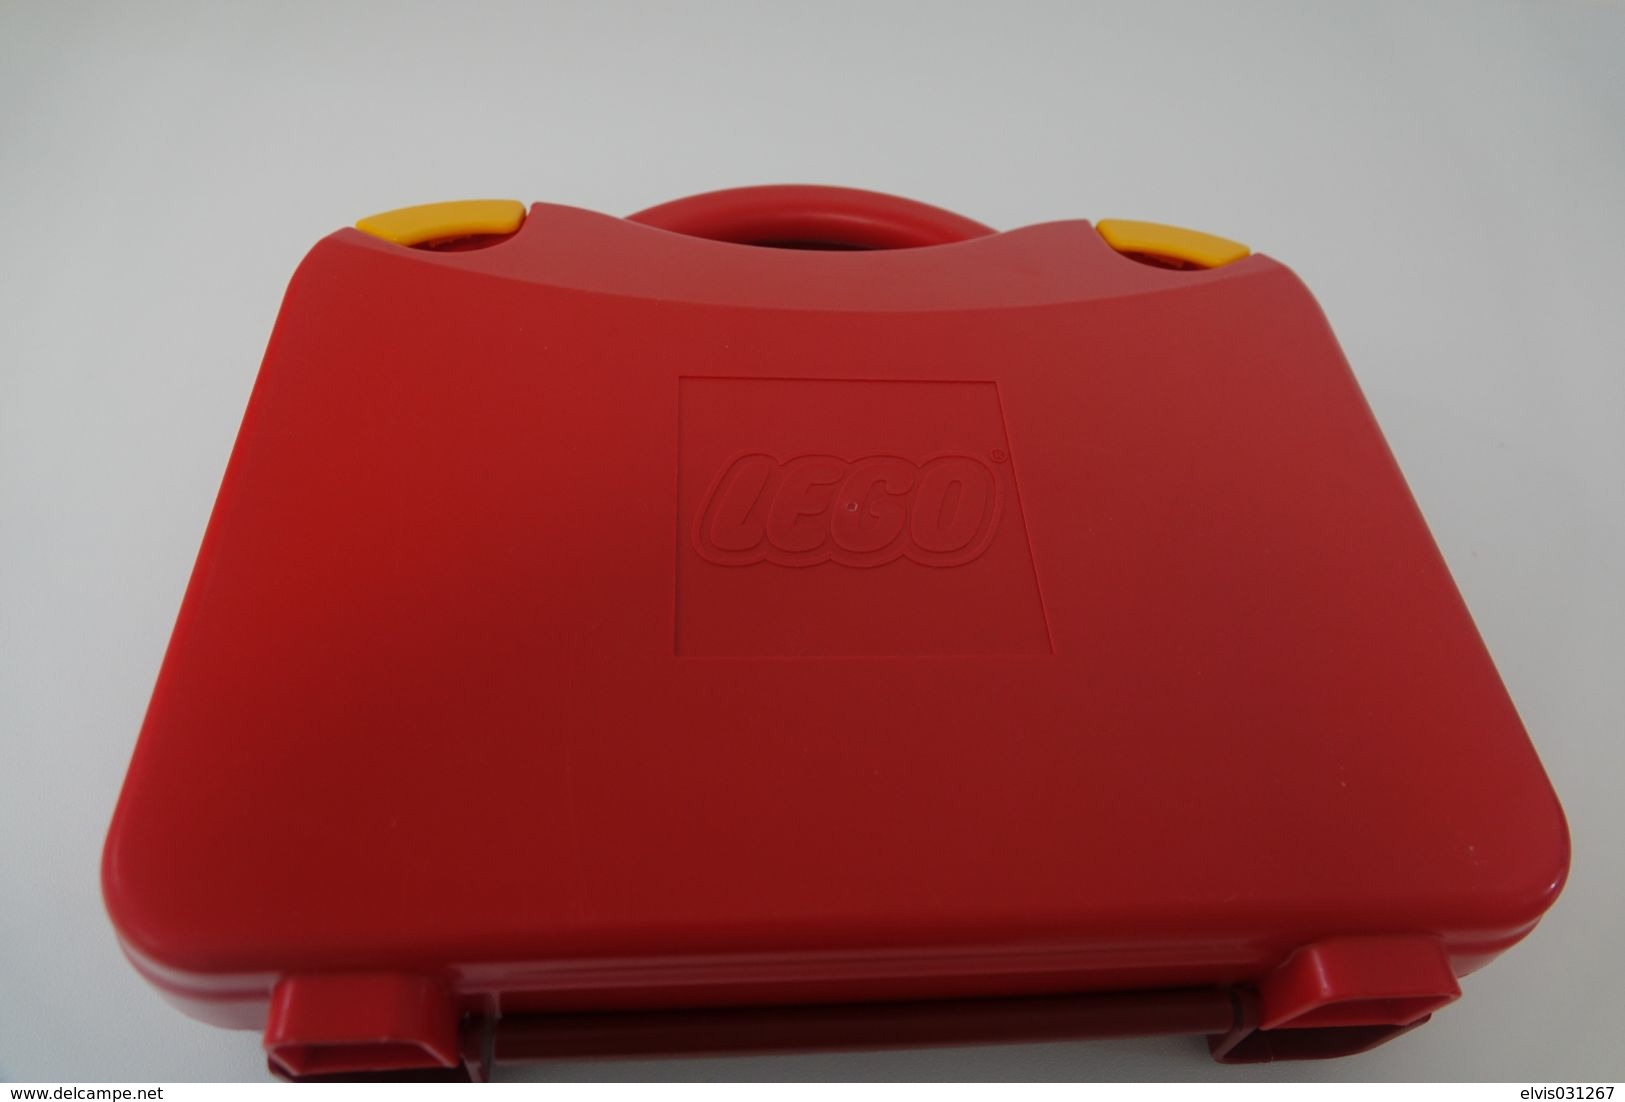 LEGO - 759528c03 - Storage Case With Rounded Corners And Red Lid, Yellow Latches - Original Lego 2015 - Vintage - Catalogi